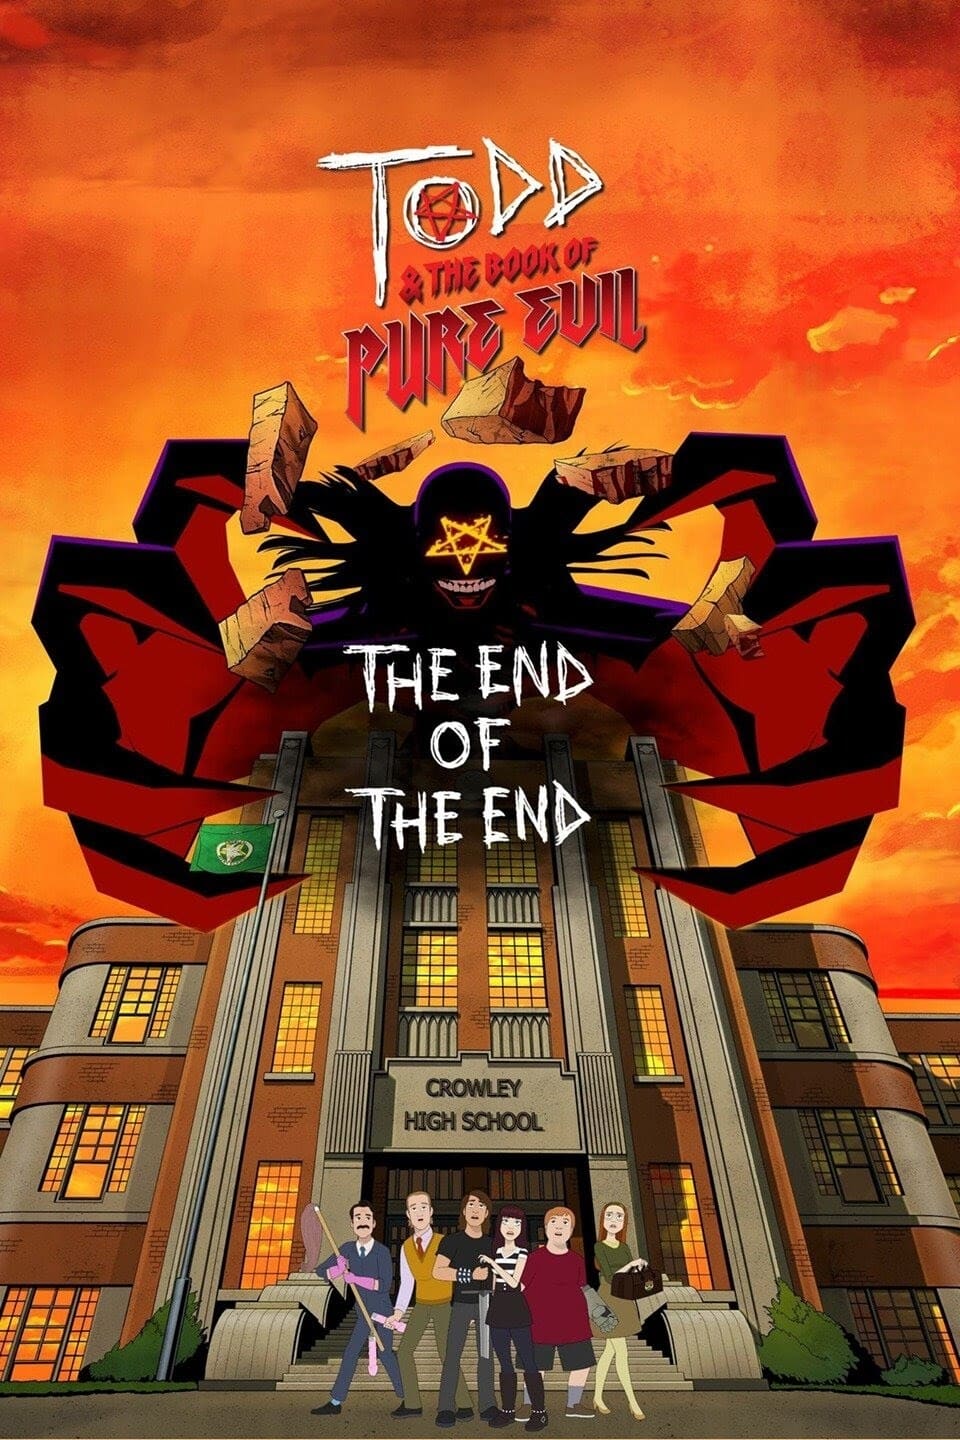 Todd and the Book of Pure Evil: The End of the End (2017)